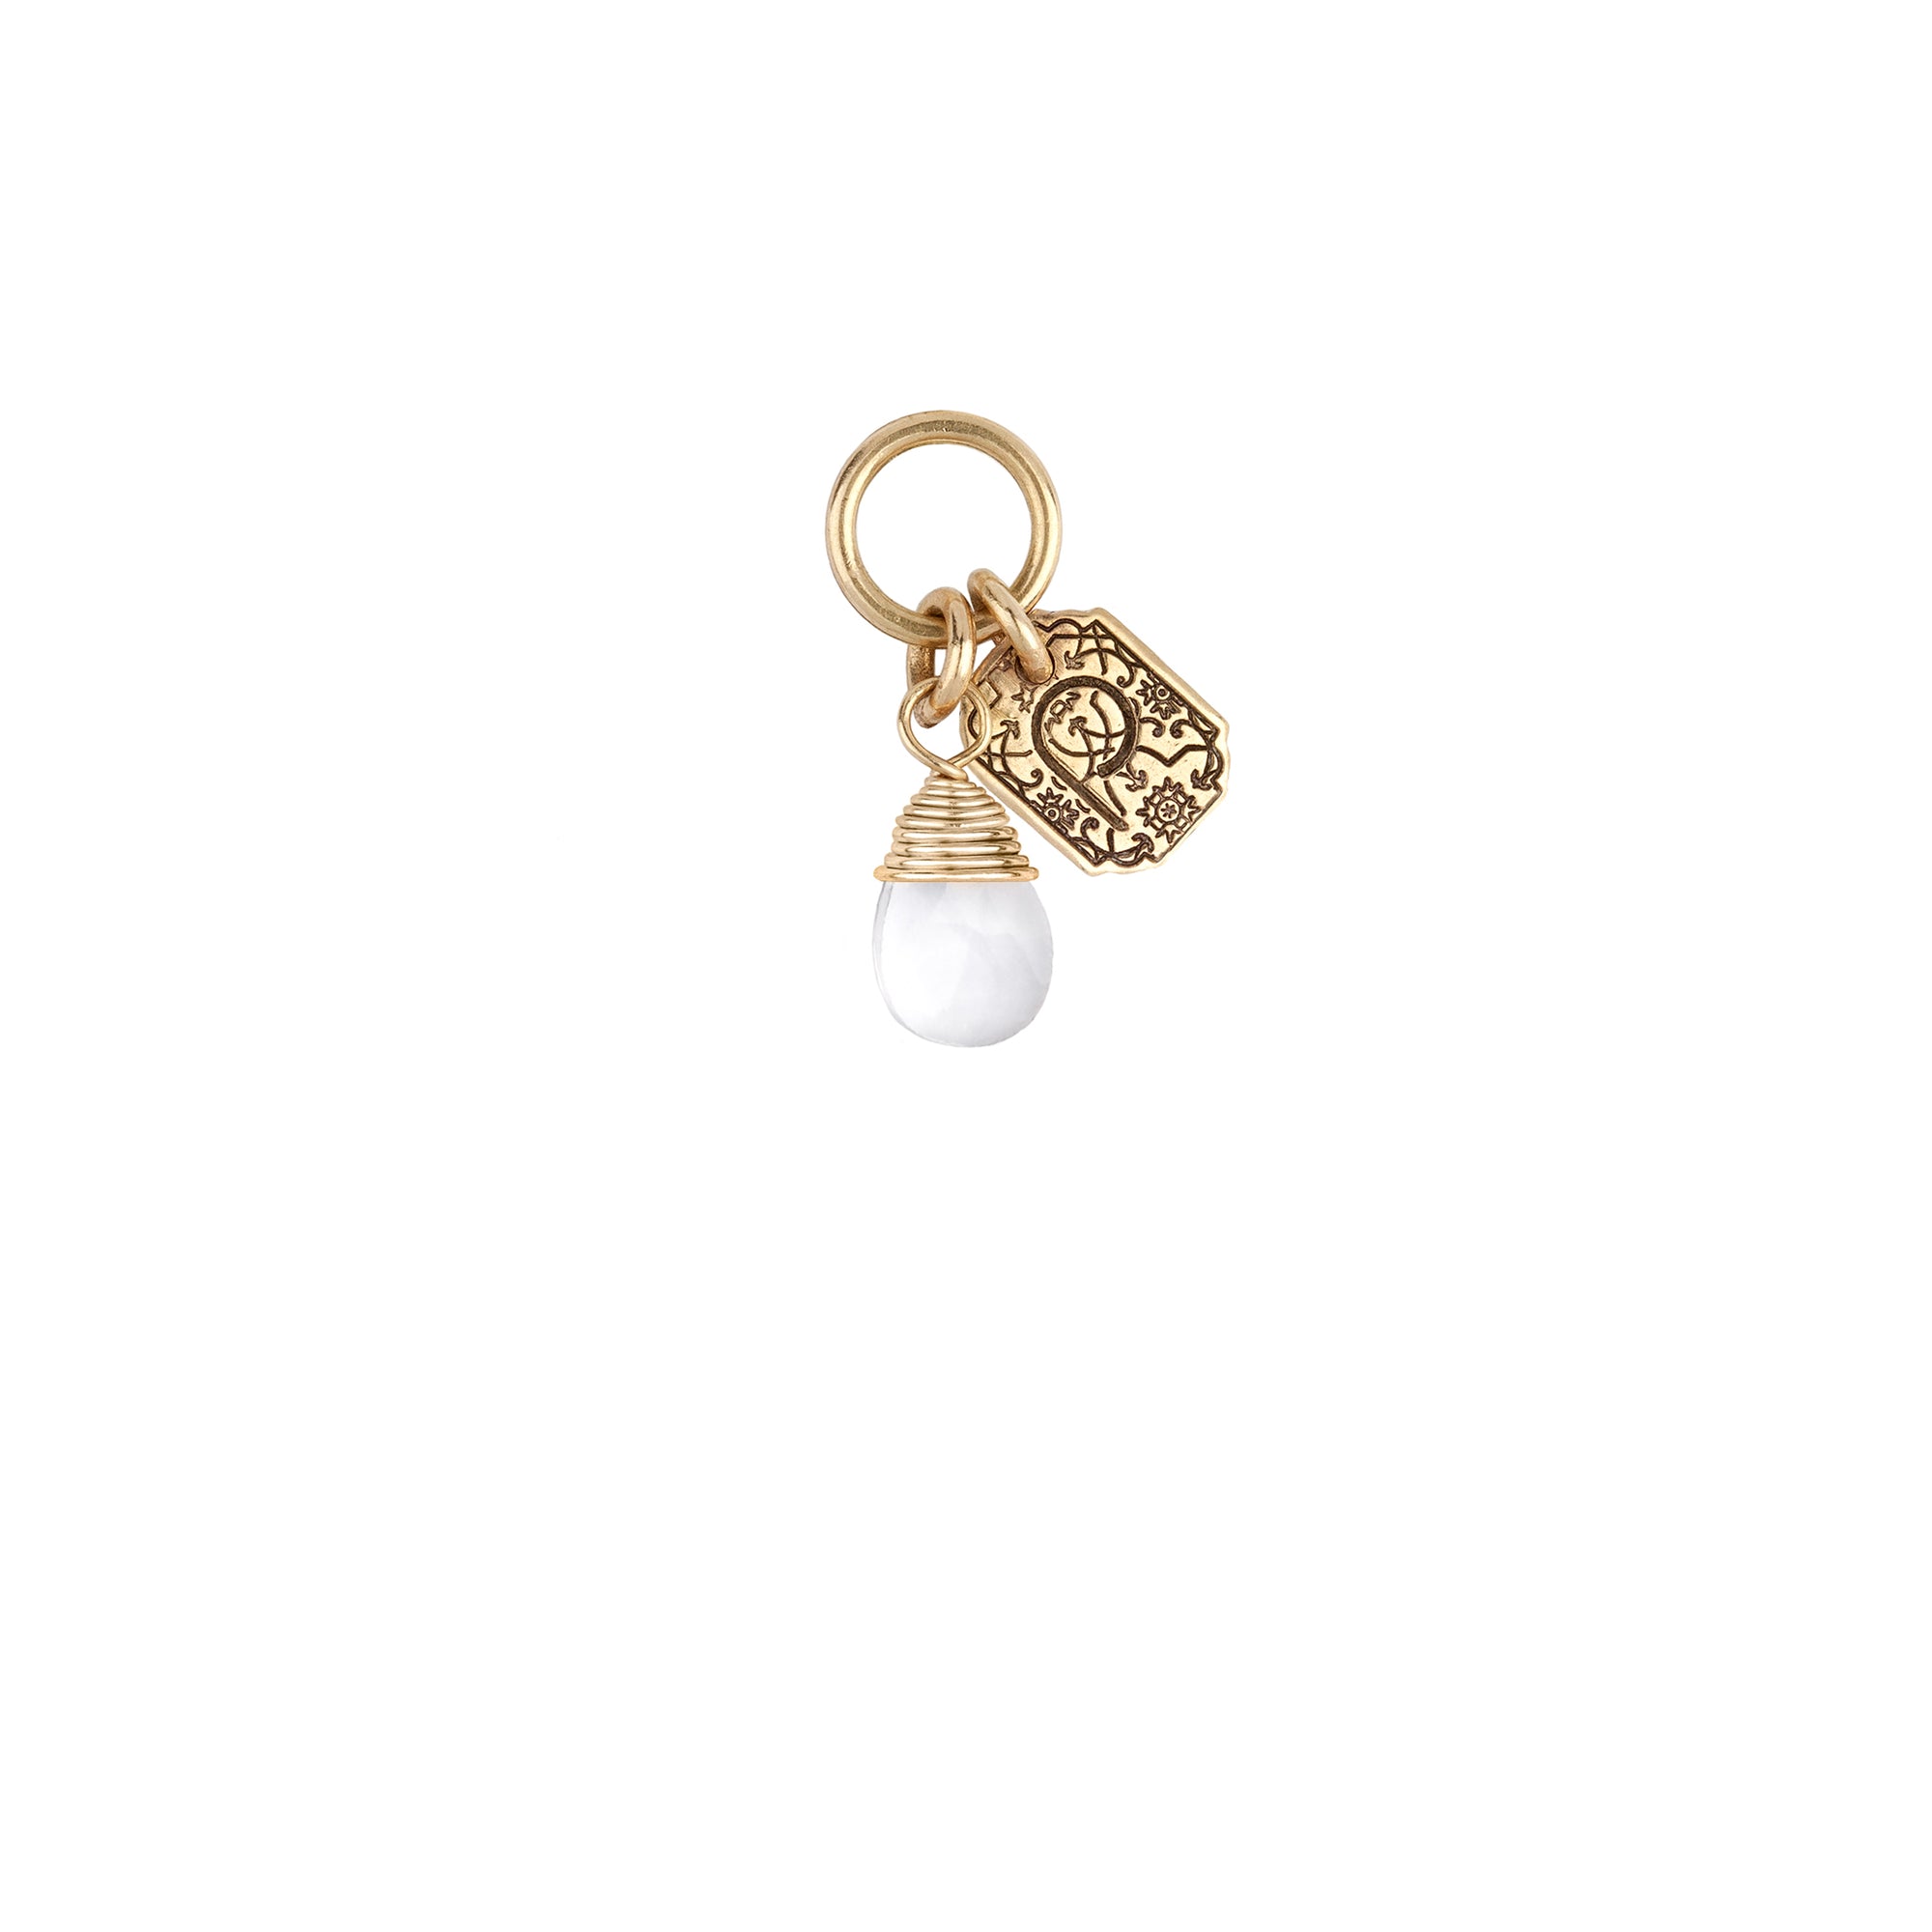 Serenity 14K Gold Signature Attraction Charm